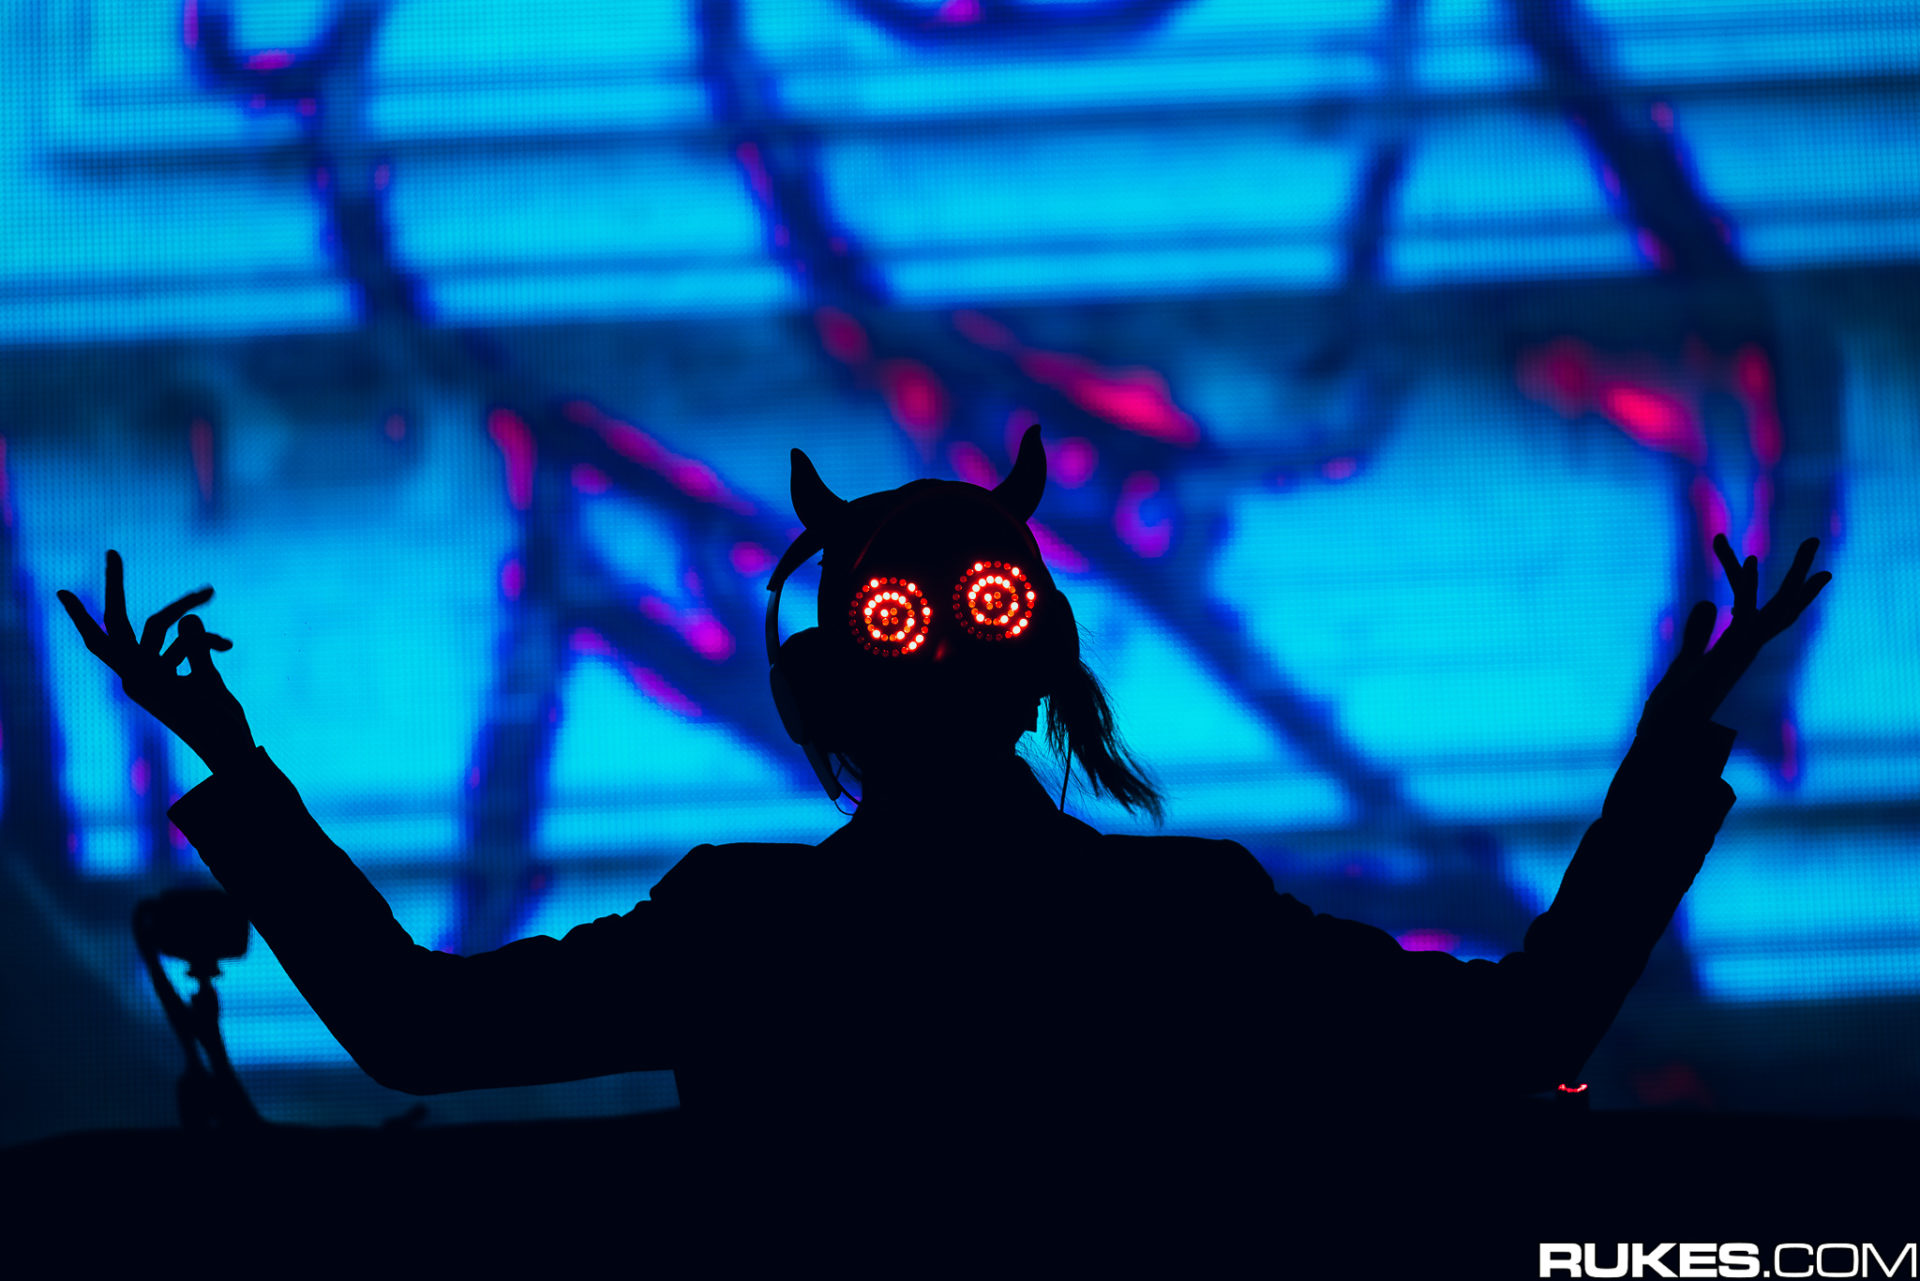 Rezz on stage with her hands up wearing her glasses